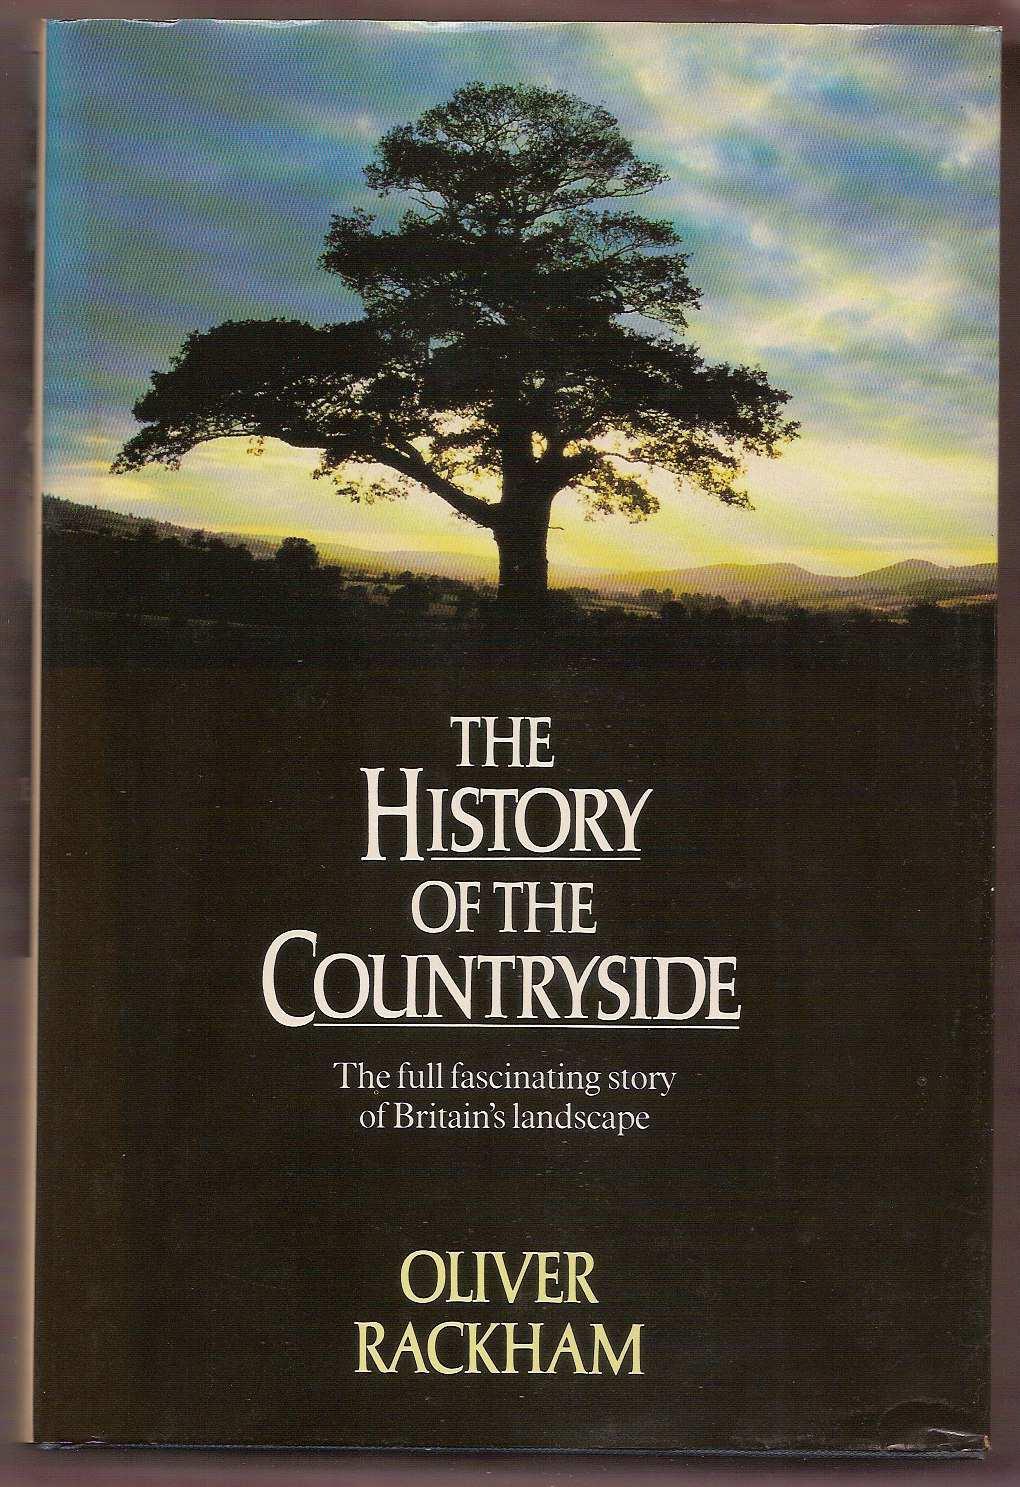 Rackham, Oliver, The history of the countryside. London: Dent, 1986.